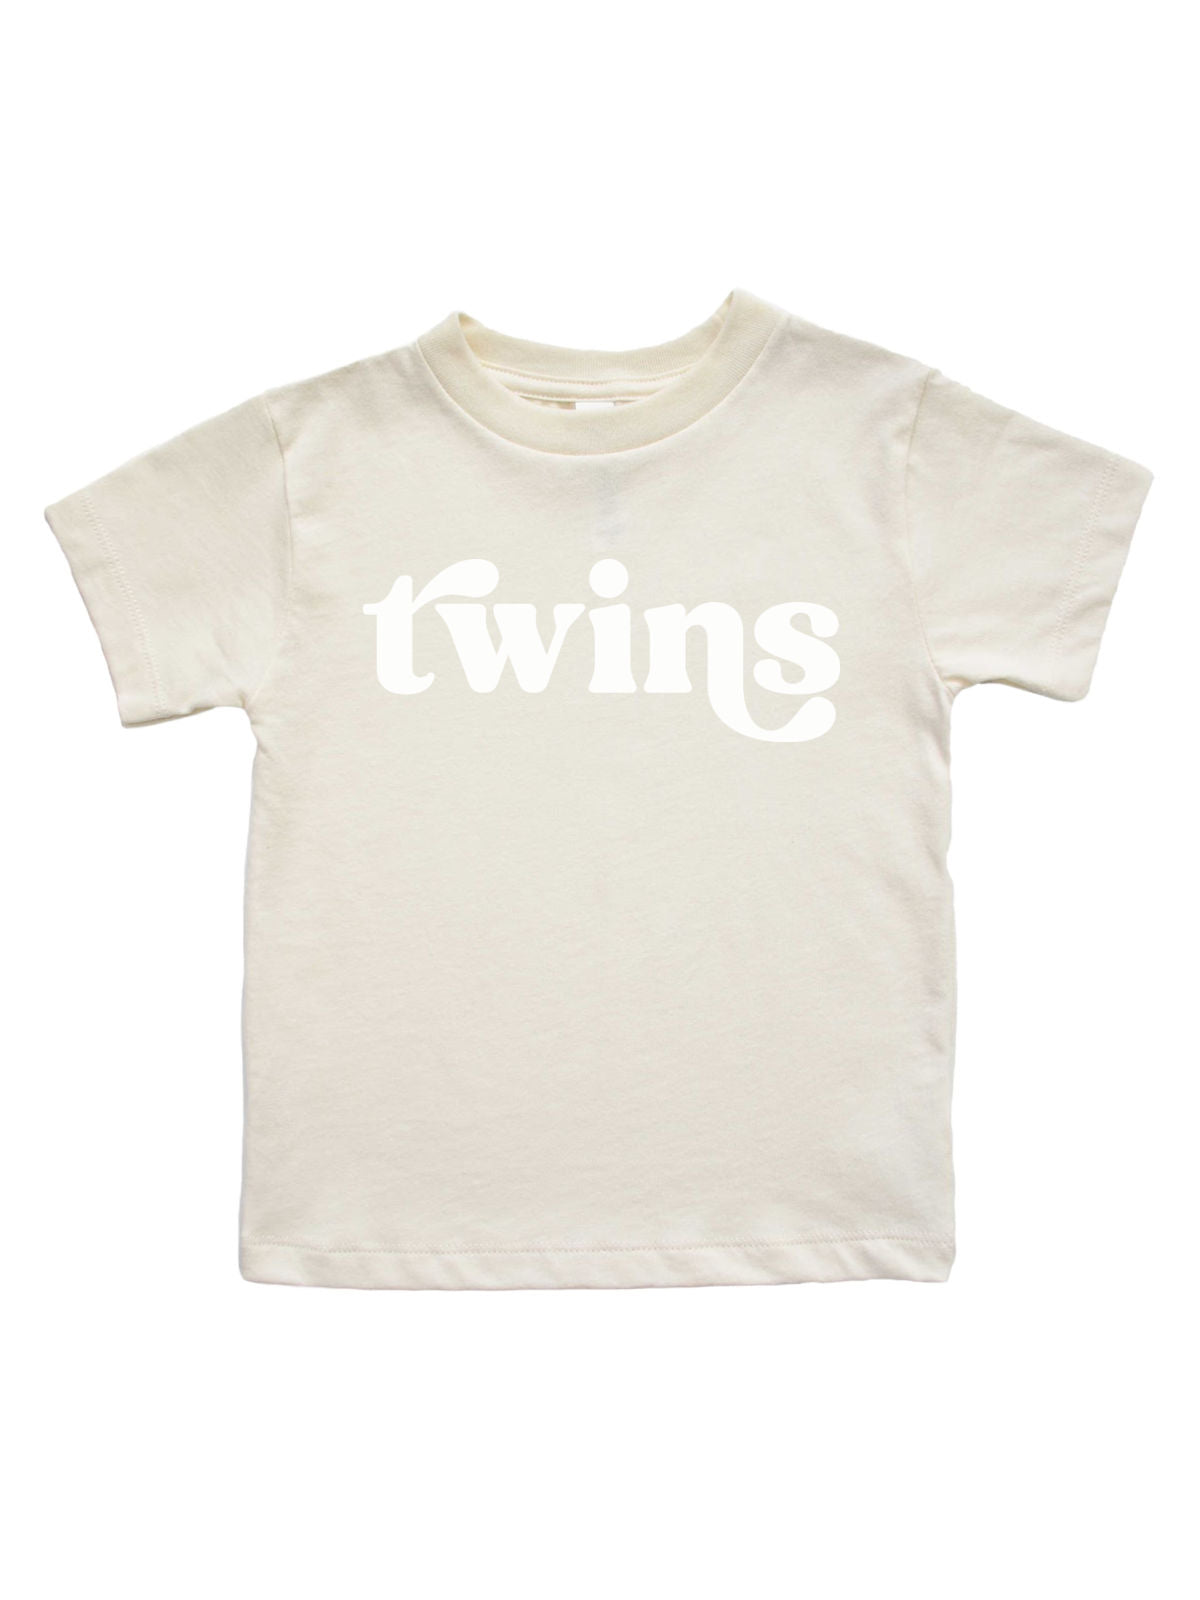 Twins Baby Bodysuit in Natural